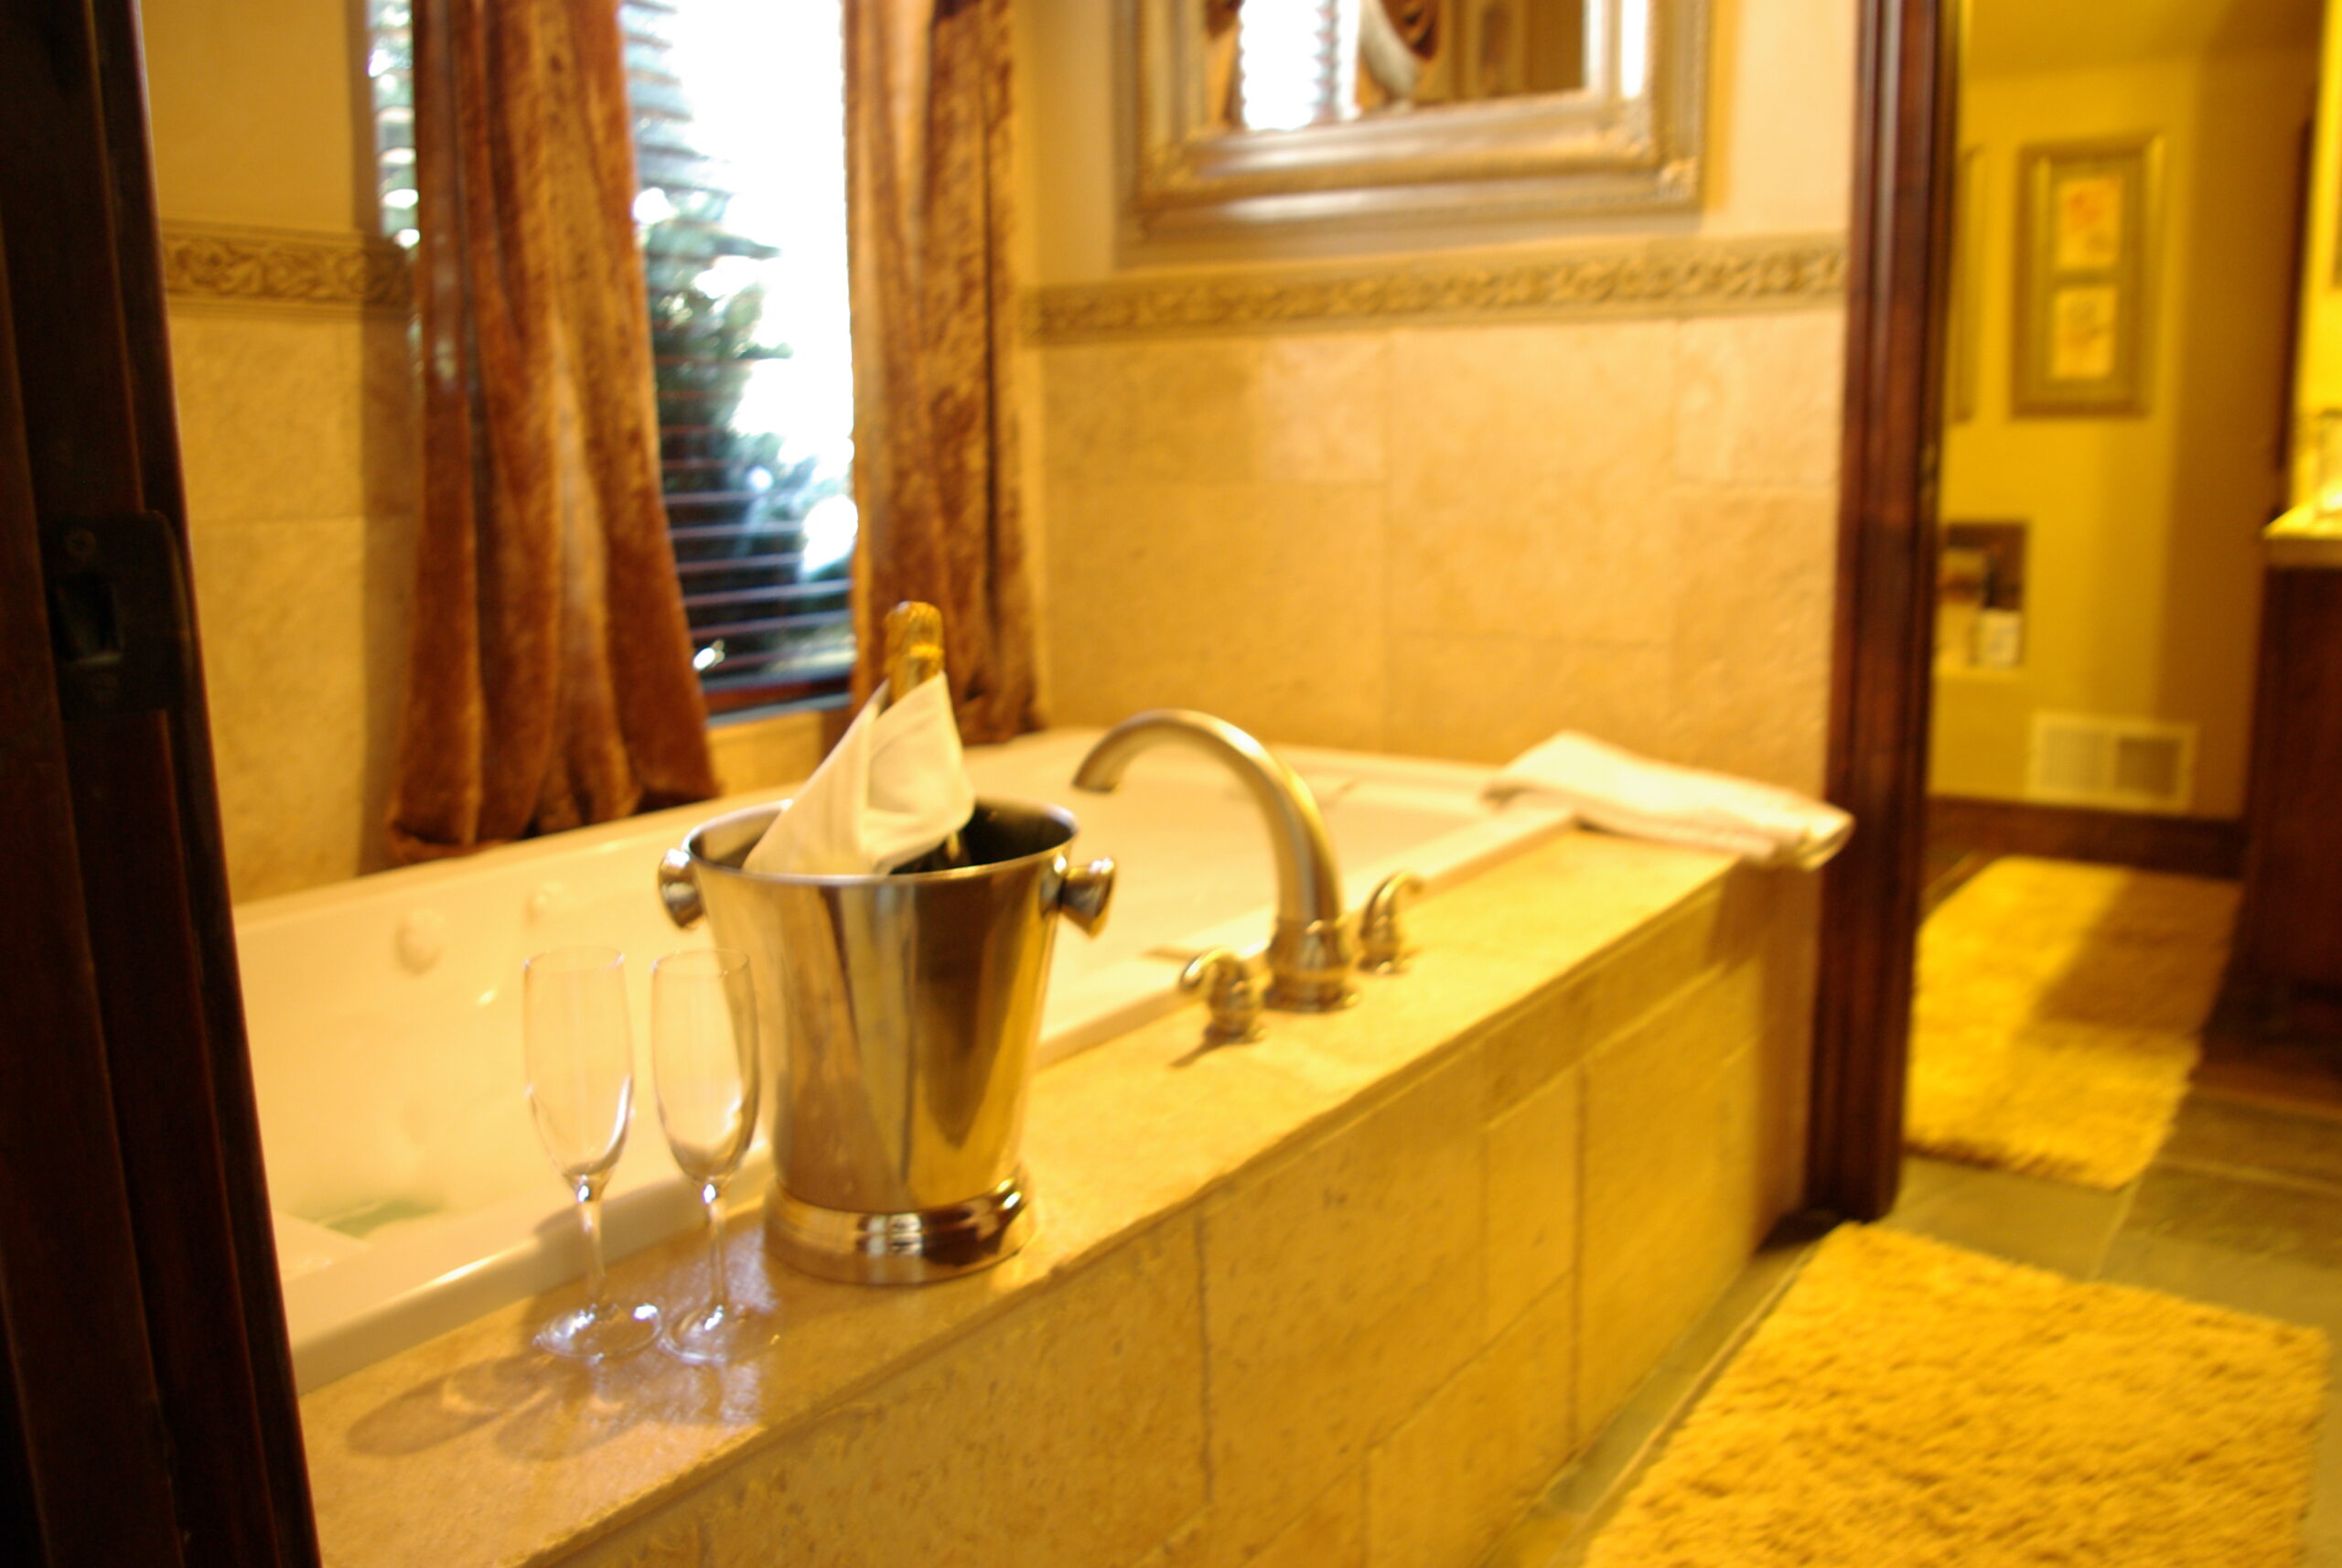 Rooms-and-Suites-Denver-Counseling-jetted-tub-at-arrowhead-manor